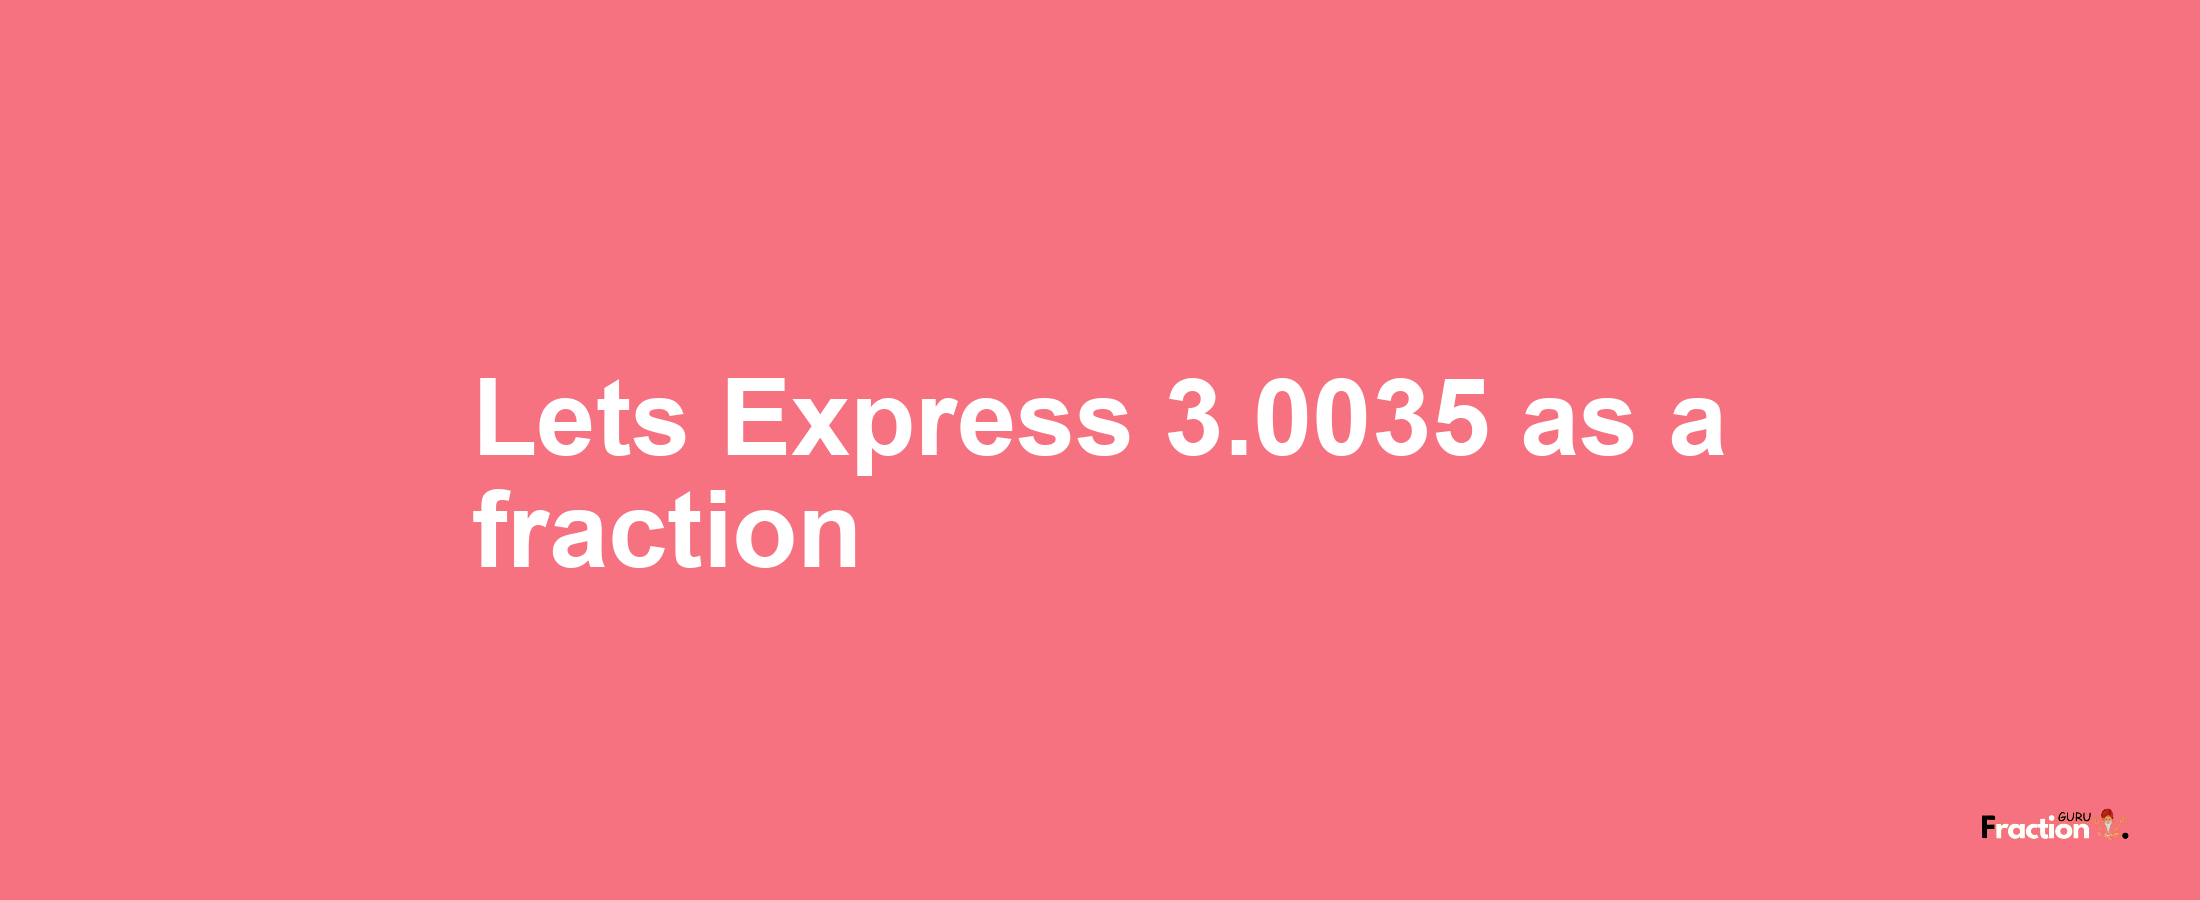 Lets Express 3.0035 as afraction